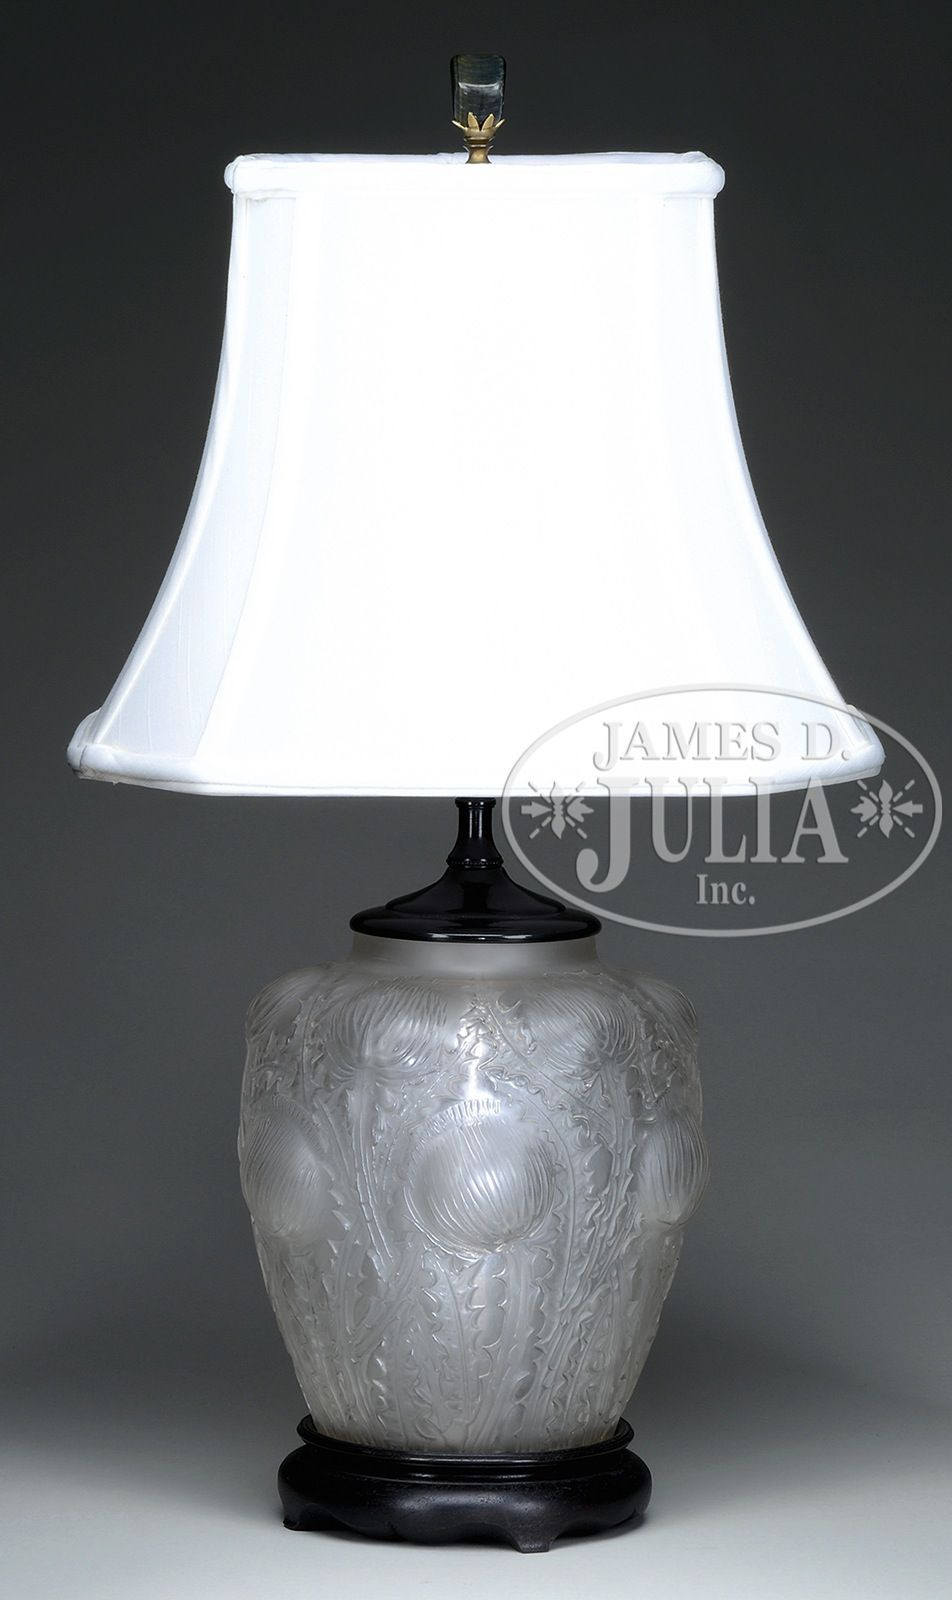 11 attractive Lamp Vase Cap 2024 free download lamp vase cap of lalique domremy lamp lalique lamp base in the domremy pattern is inside lalique domremy lamp lalique lamp base in the domremy pattern is impressed with high relief thistle f